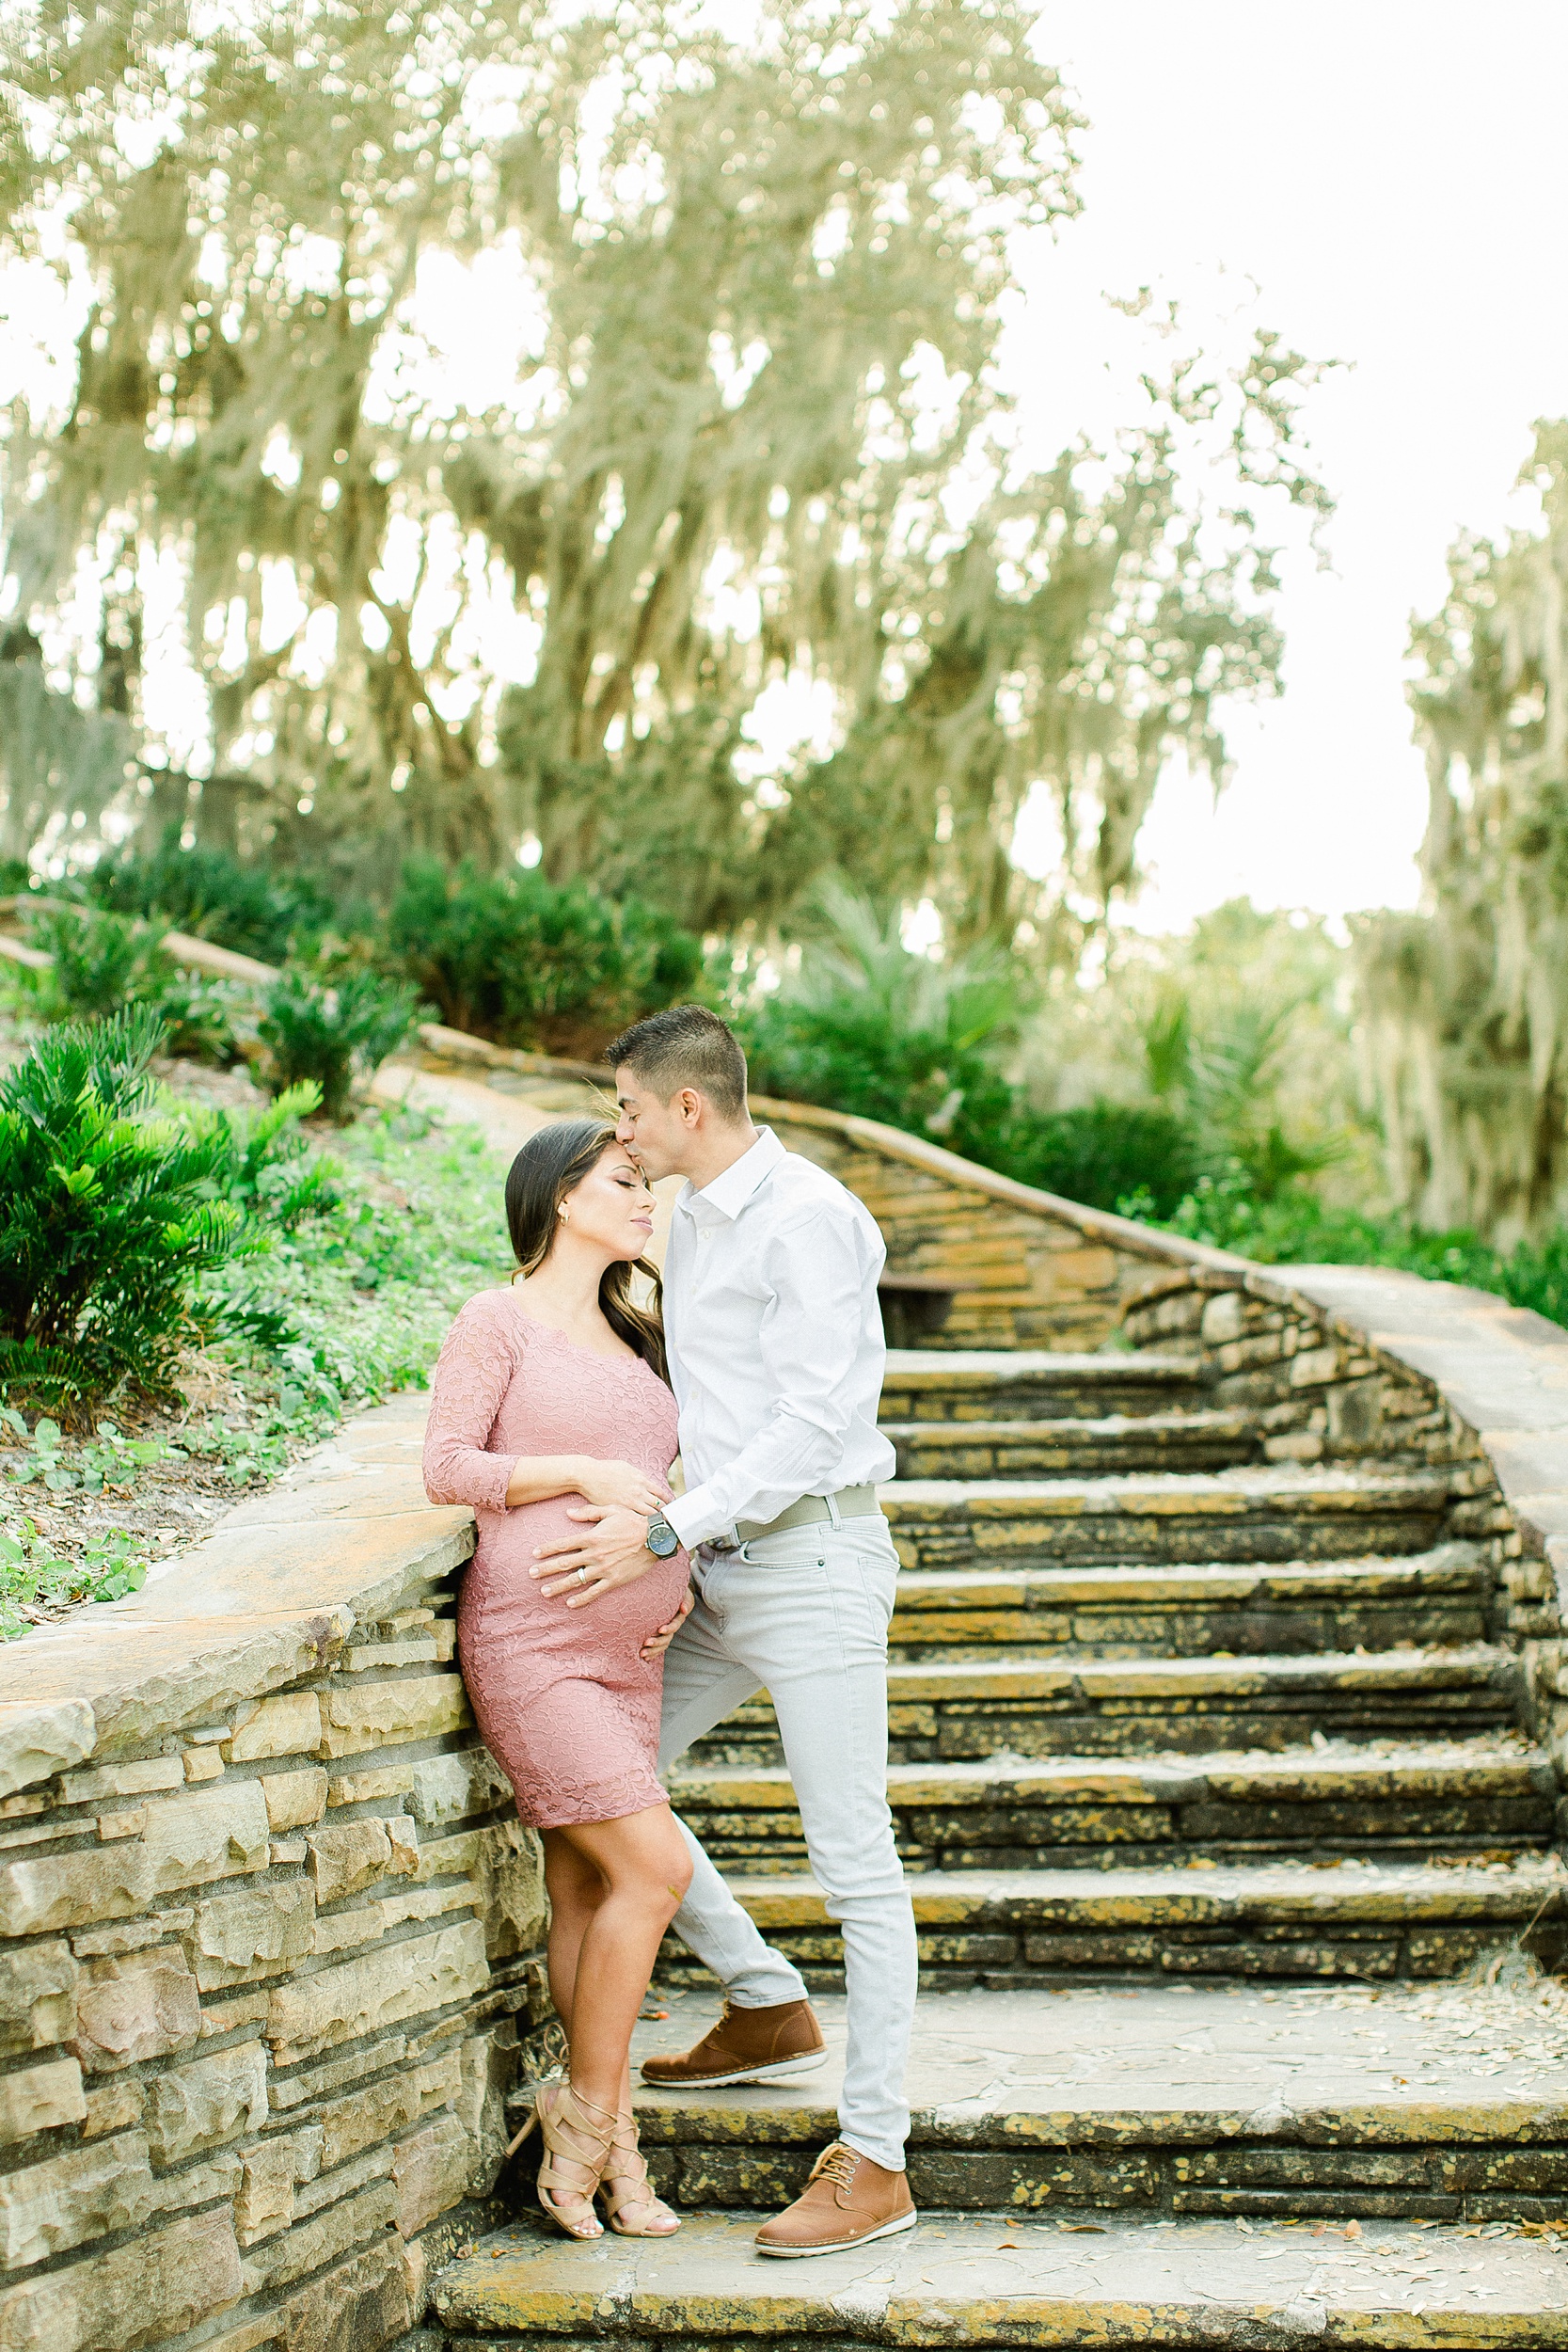 Tampa Maternity Photographer | © Ailyn La Torre Photography 2020